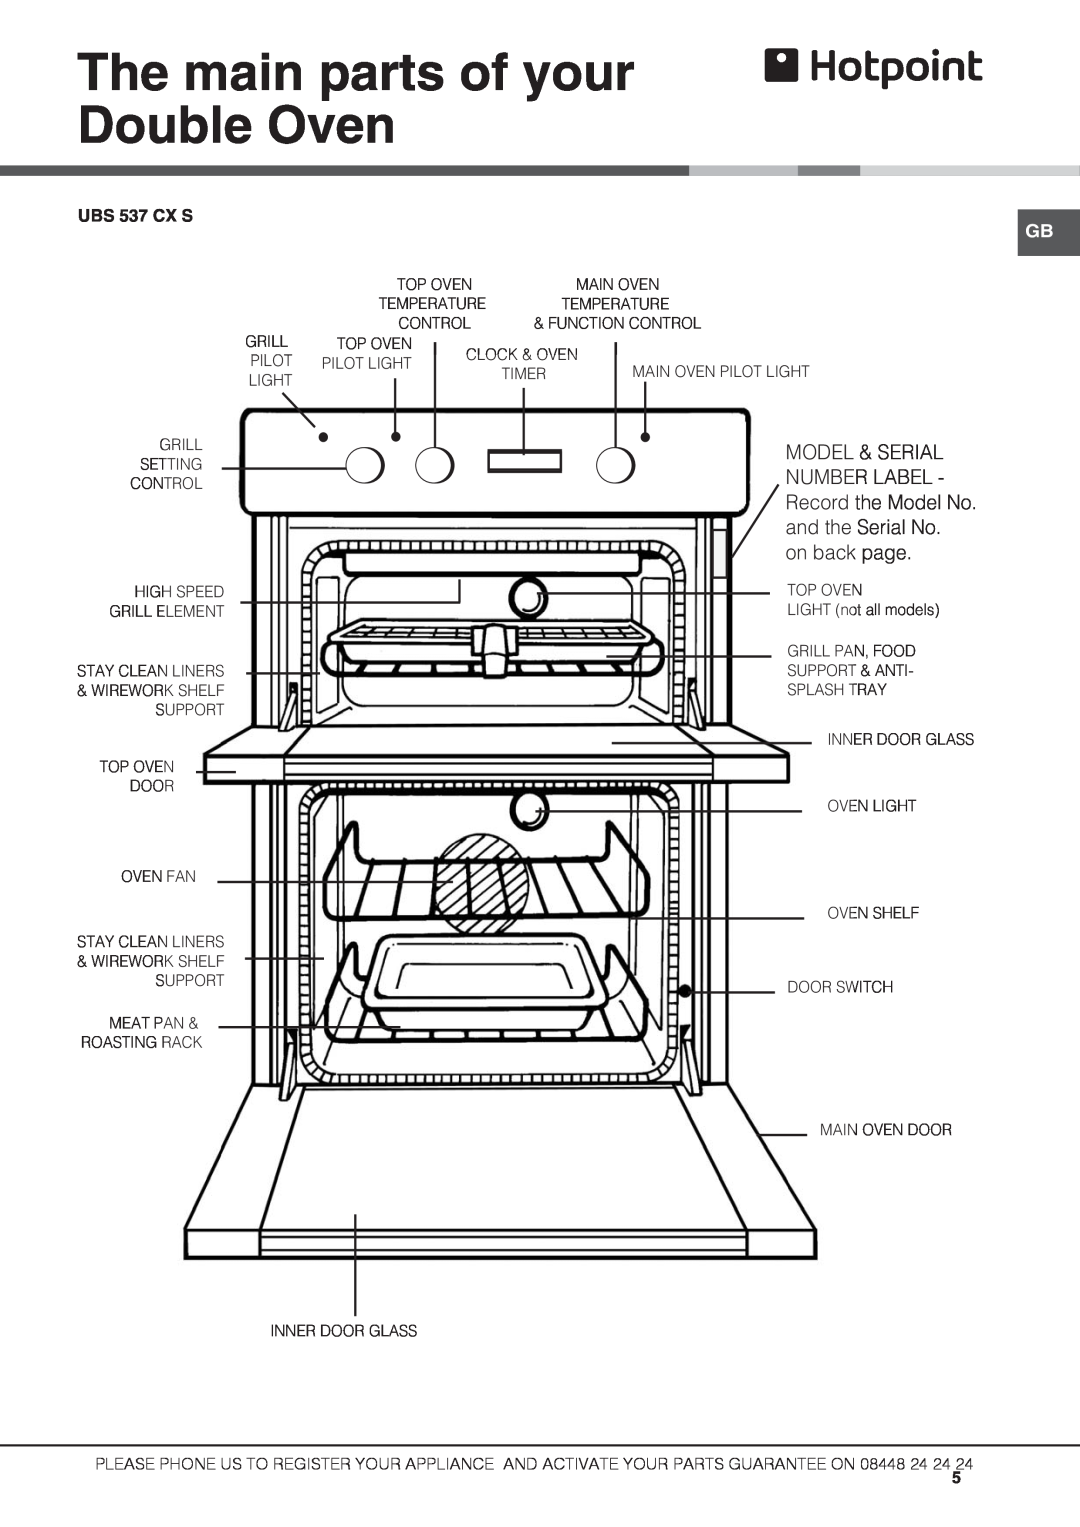 Hotpoint UBS 537 CX S manual The main parts of your Double Oven 